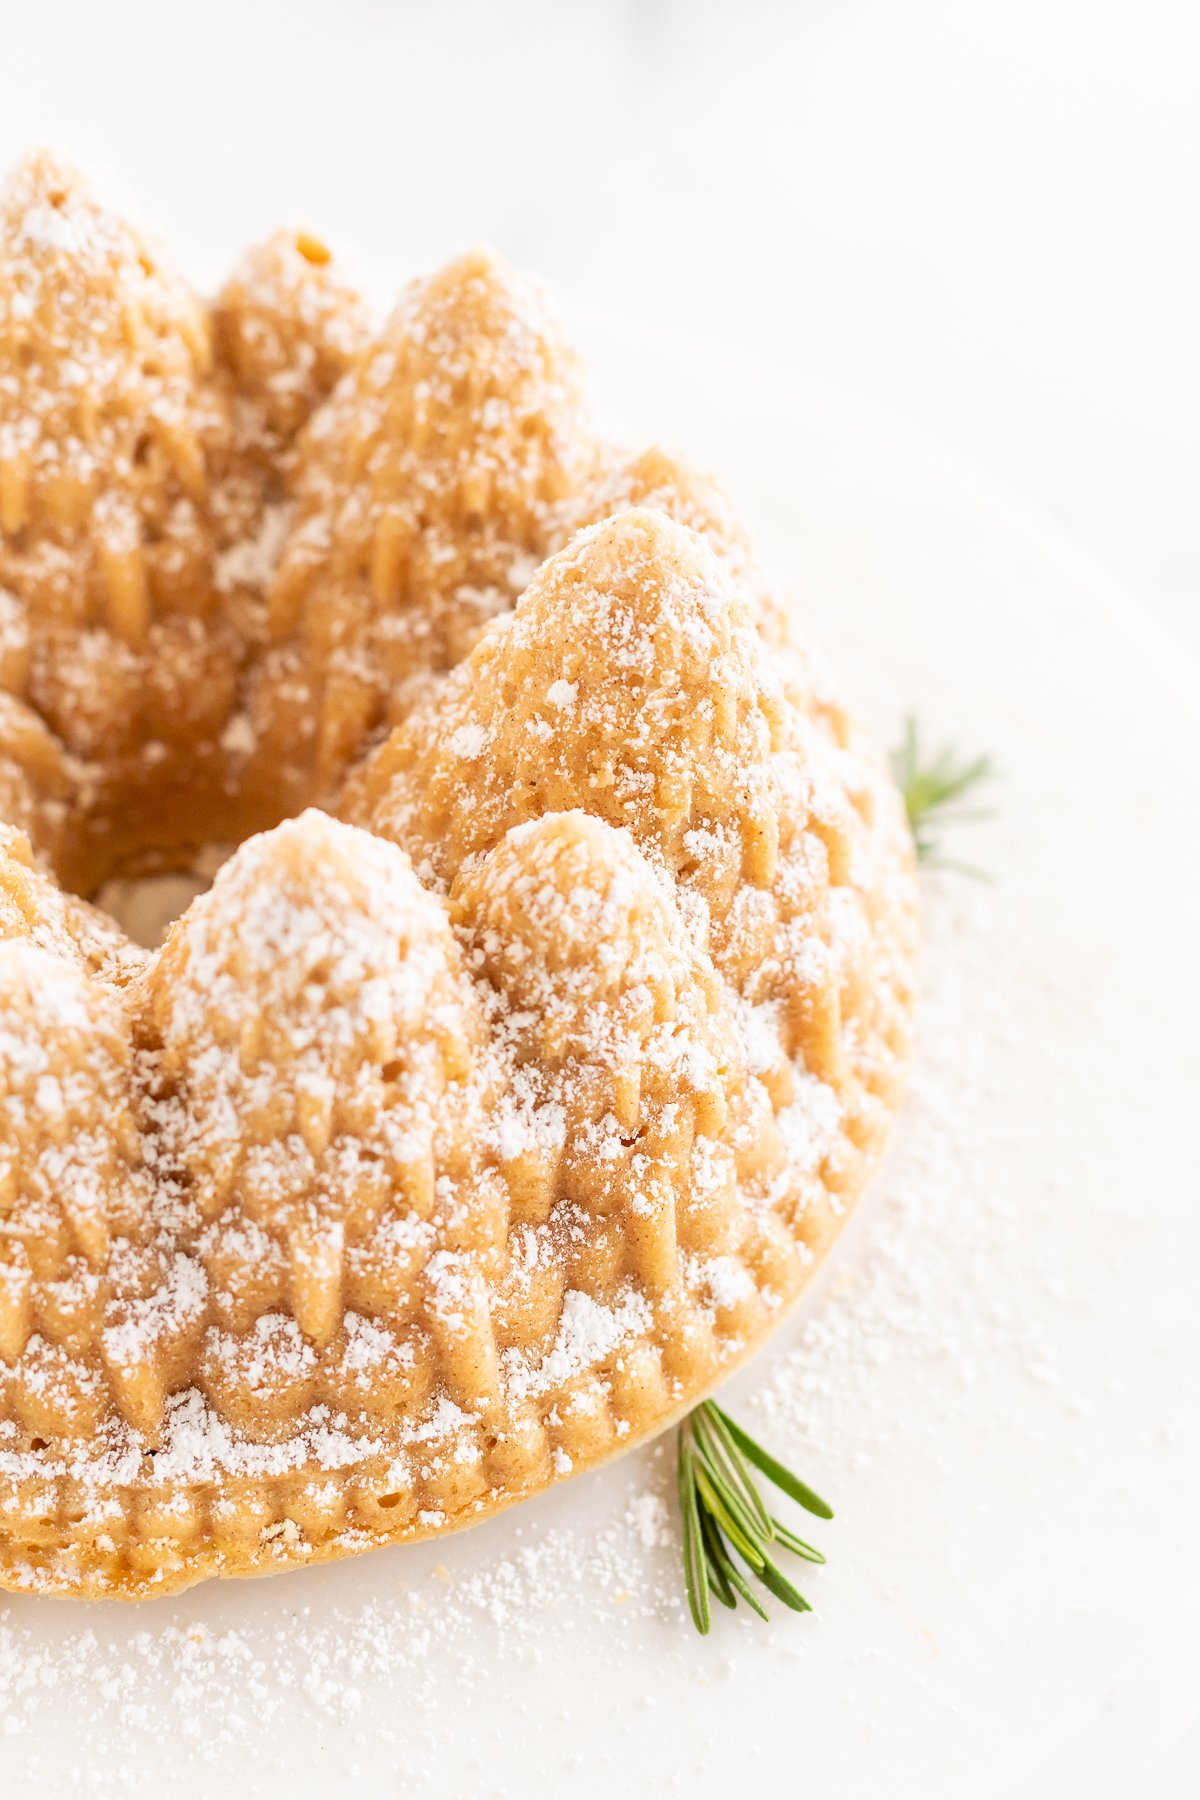 A cinnamon pound cake topped with powdered sugar and rosemary.